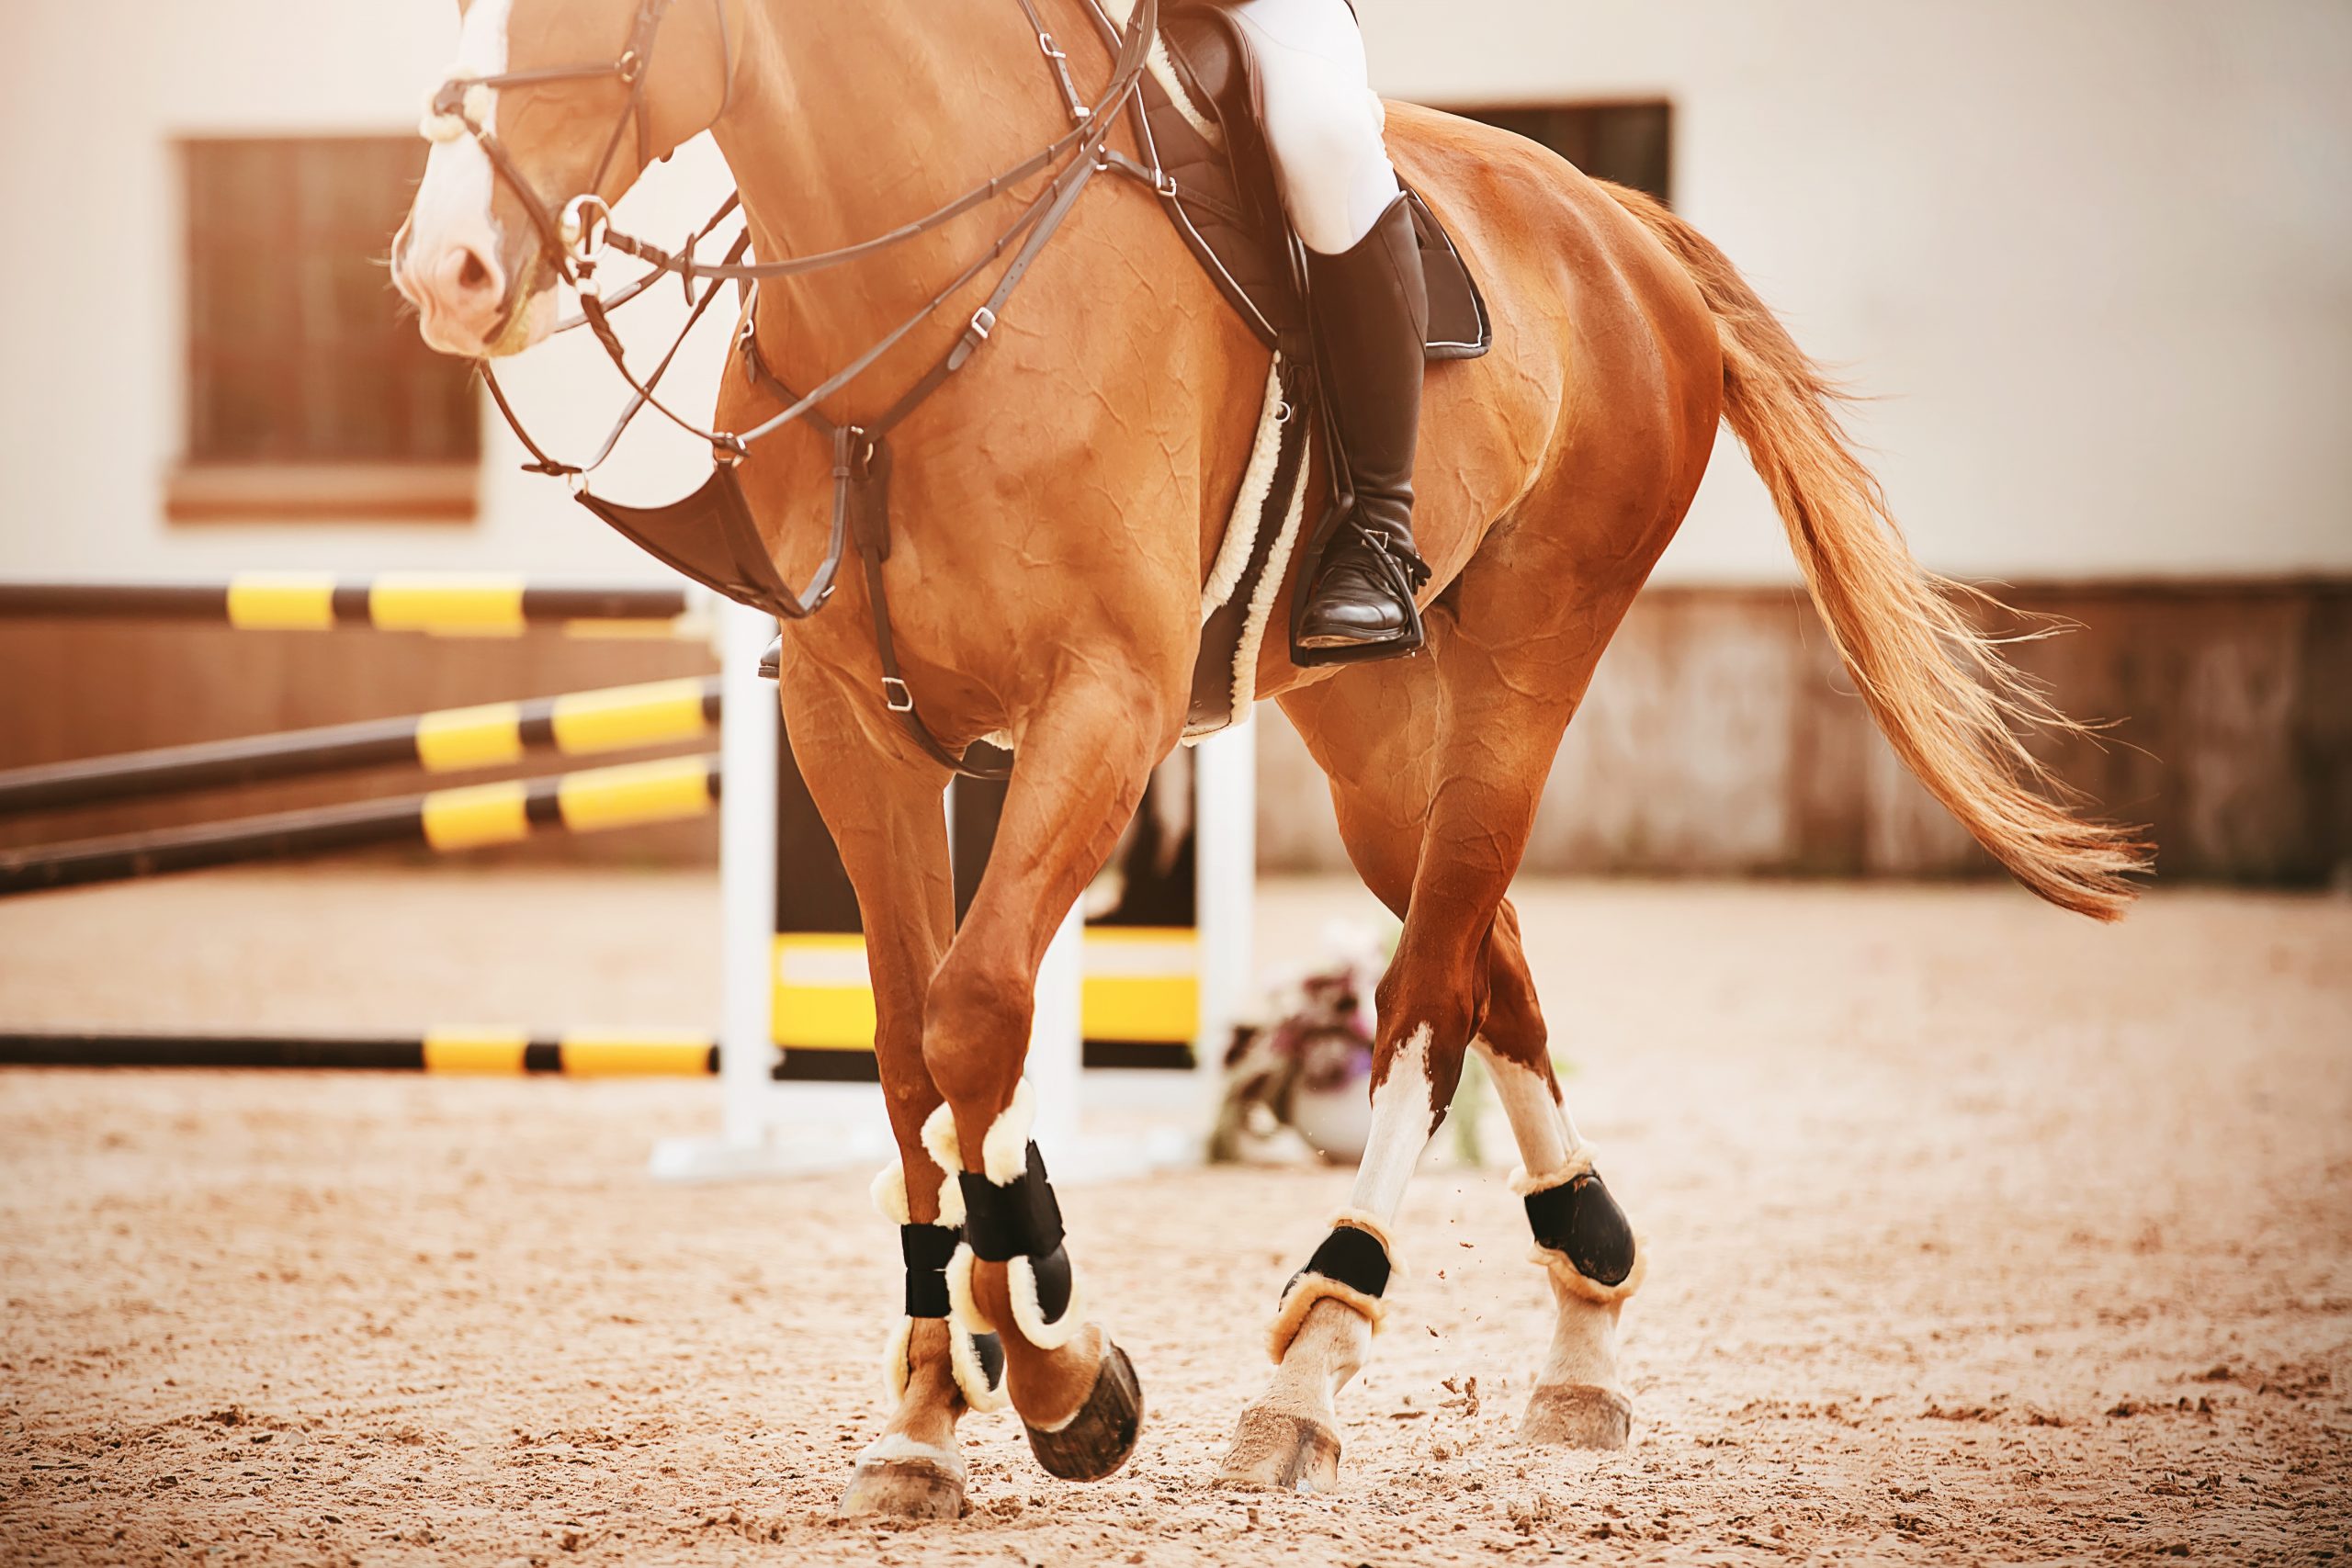 A beautiful sorrel horse with a rider in the saddle and a long tail proudly walks through the sandy arena past the yellow-black barrier, over which it recently jumped. Equestrian sports. Horse riding.